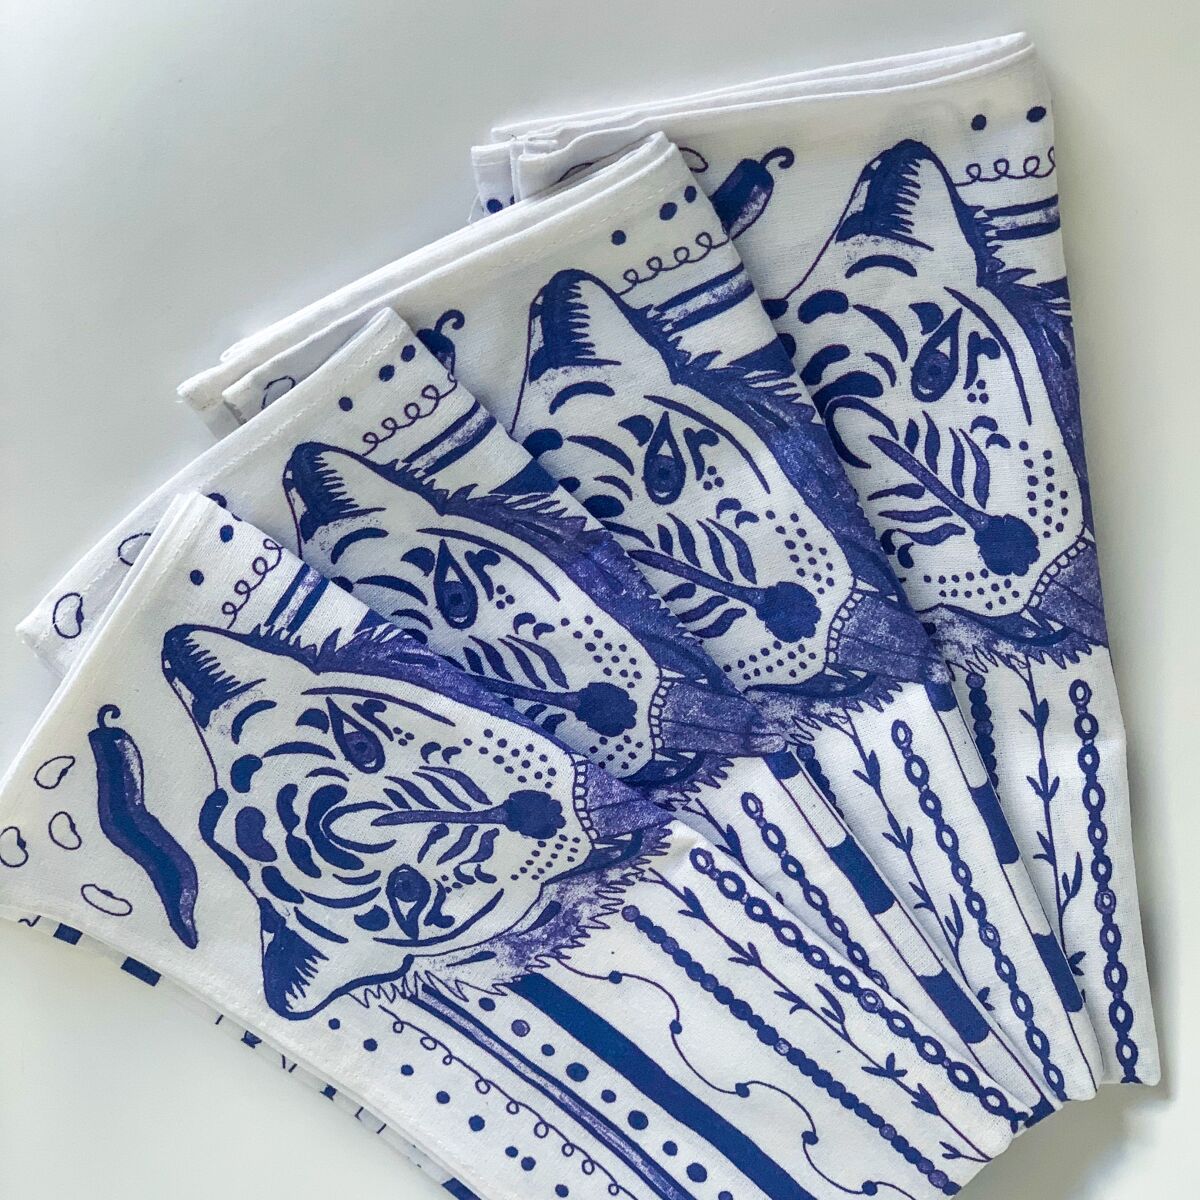 Blue and white table napkins bearing a tiger design